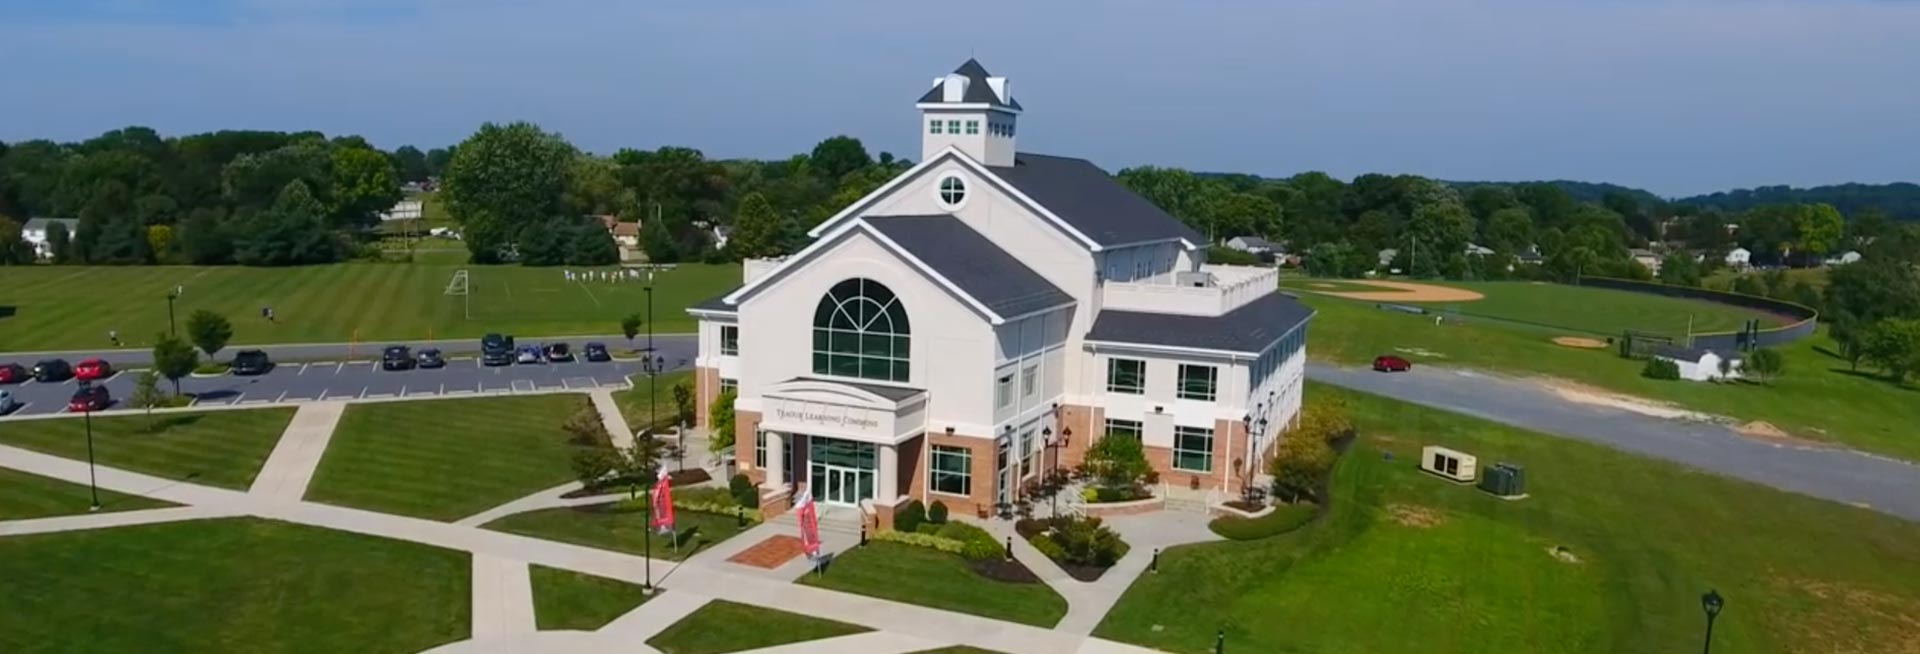 Ariel view of the Tague Learning Commons.